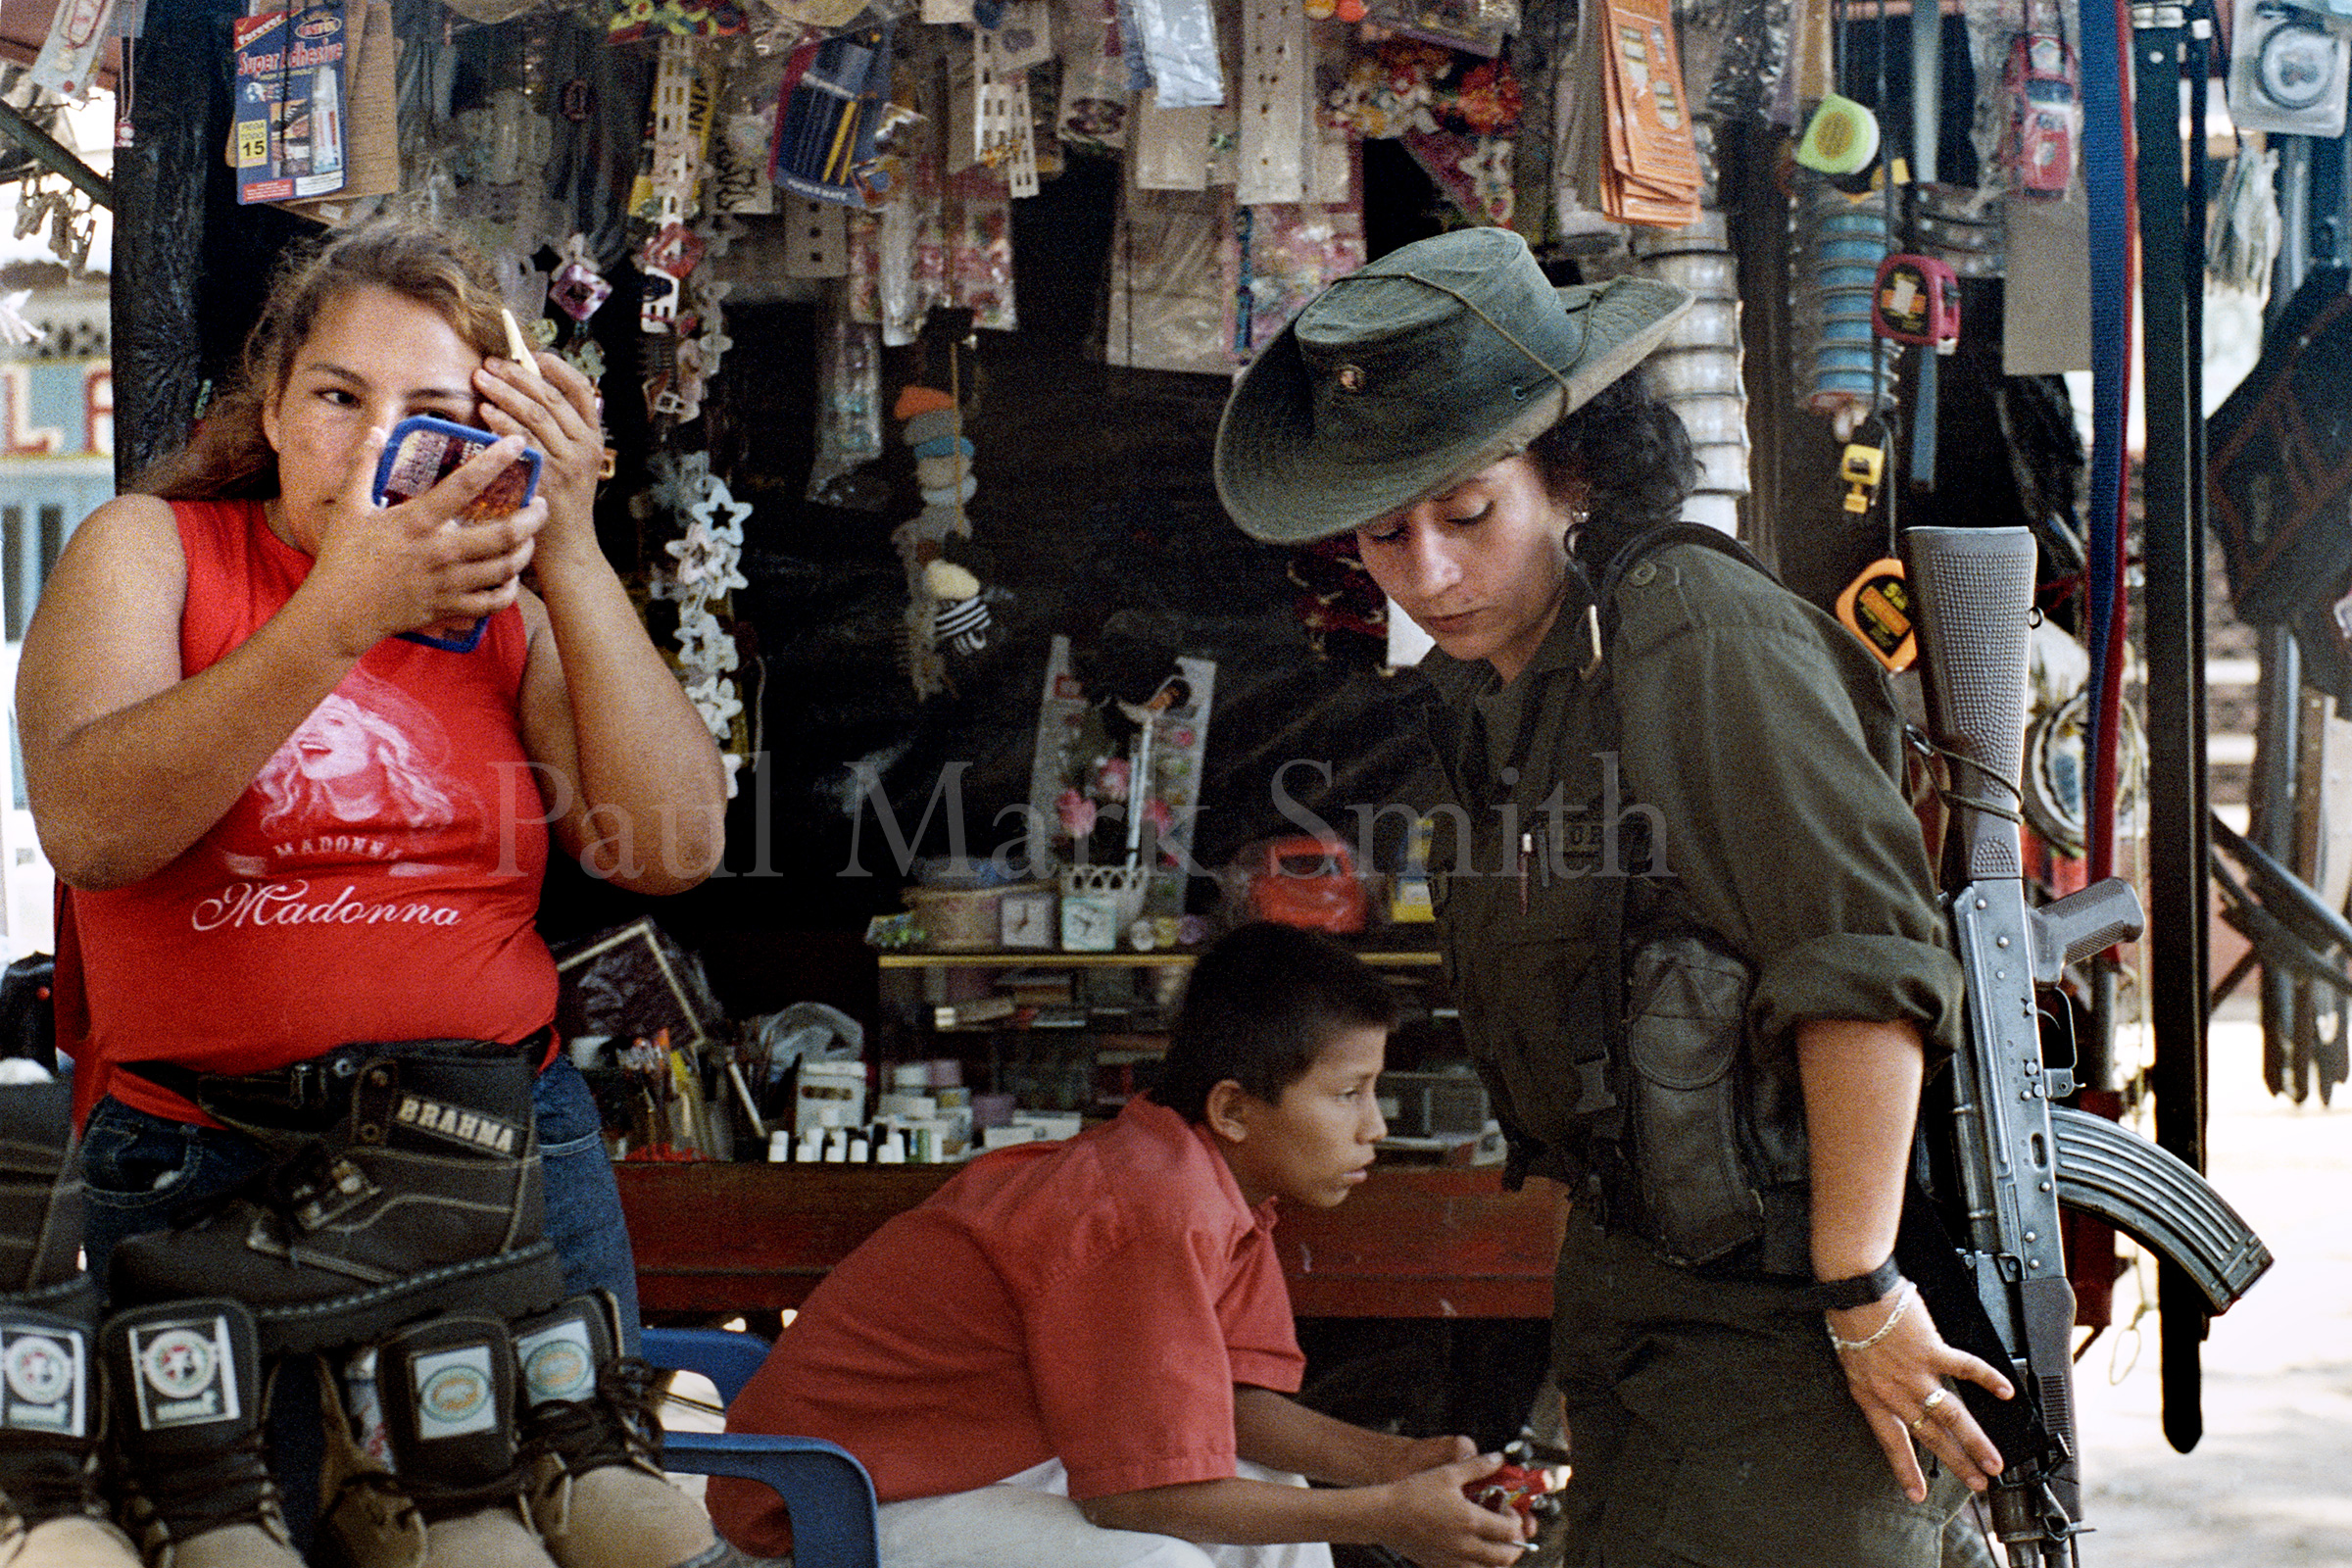 A FARC guerrilla woman and woman street vendor with a Madonna t-shirt.